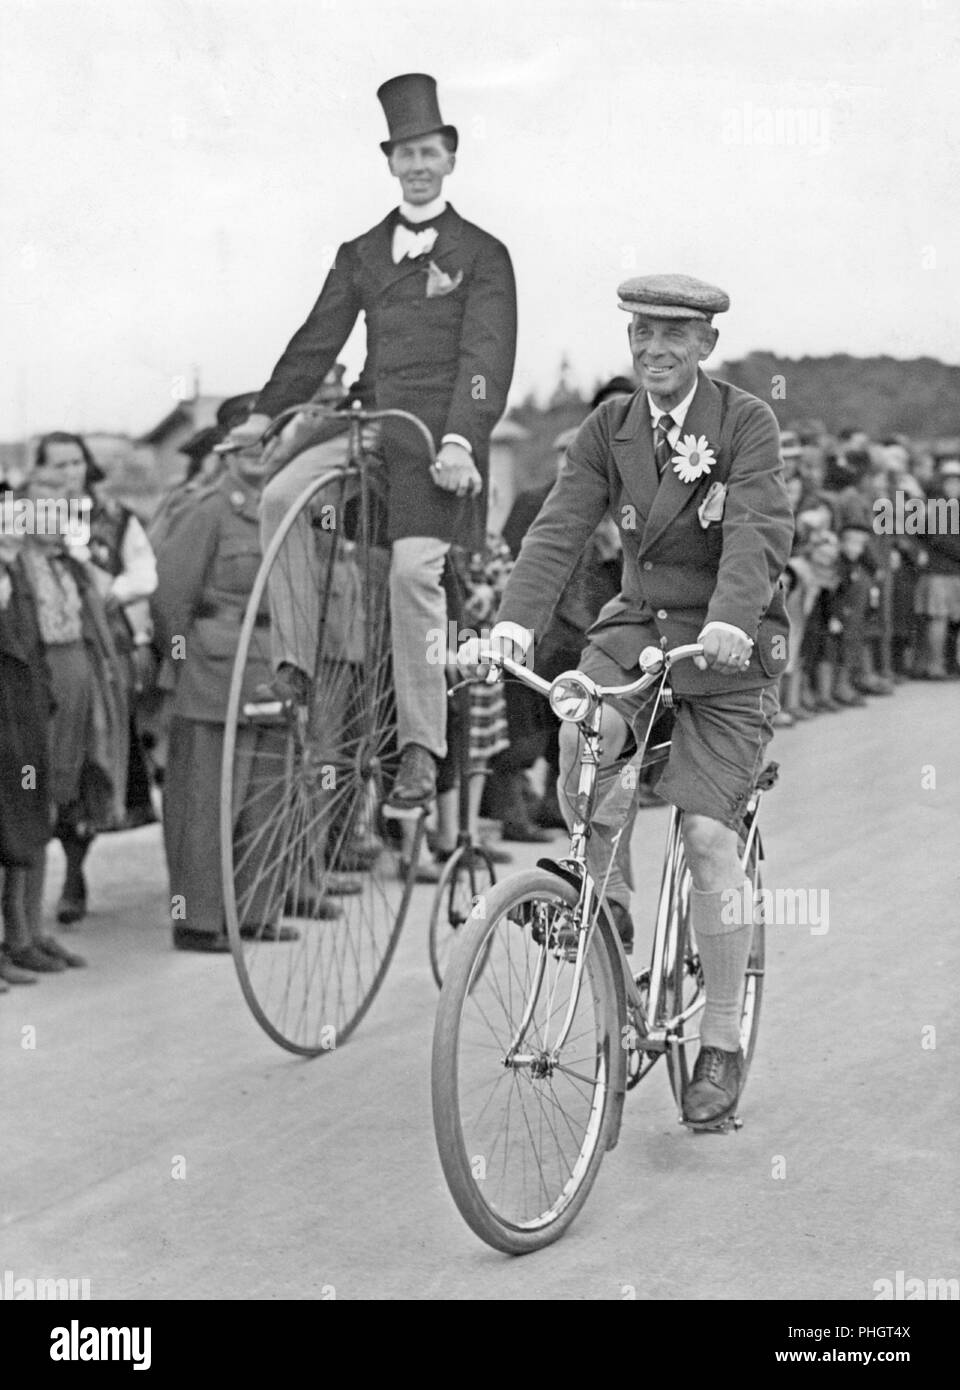 Penny farthing bicycle. A man is riding a penny-farthing bicycle besides a man on a regular bicycle. 1930s Stock Photo